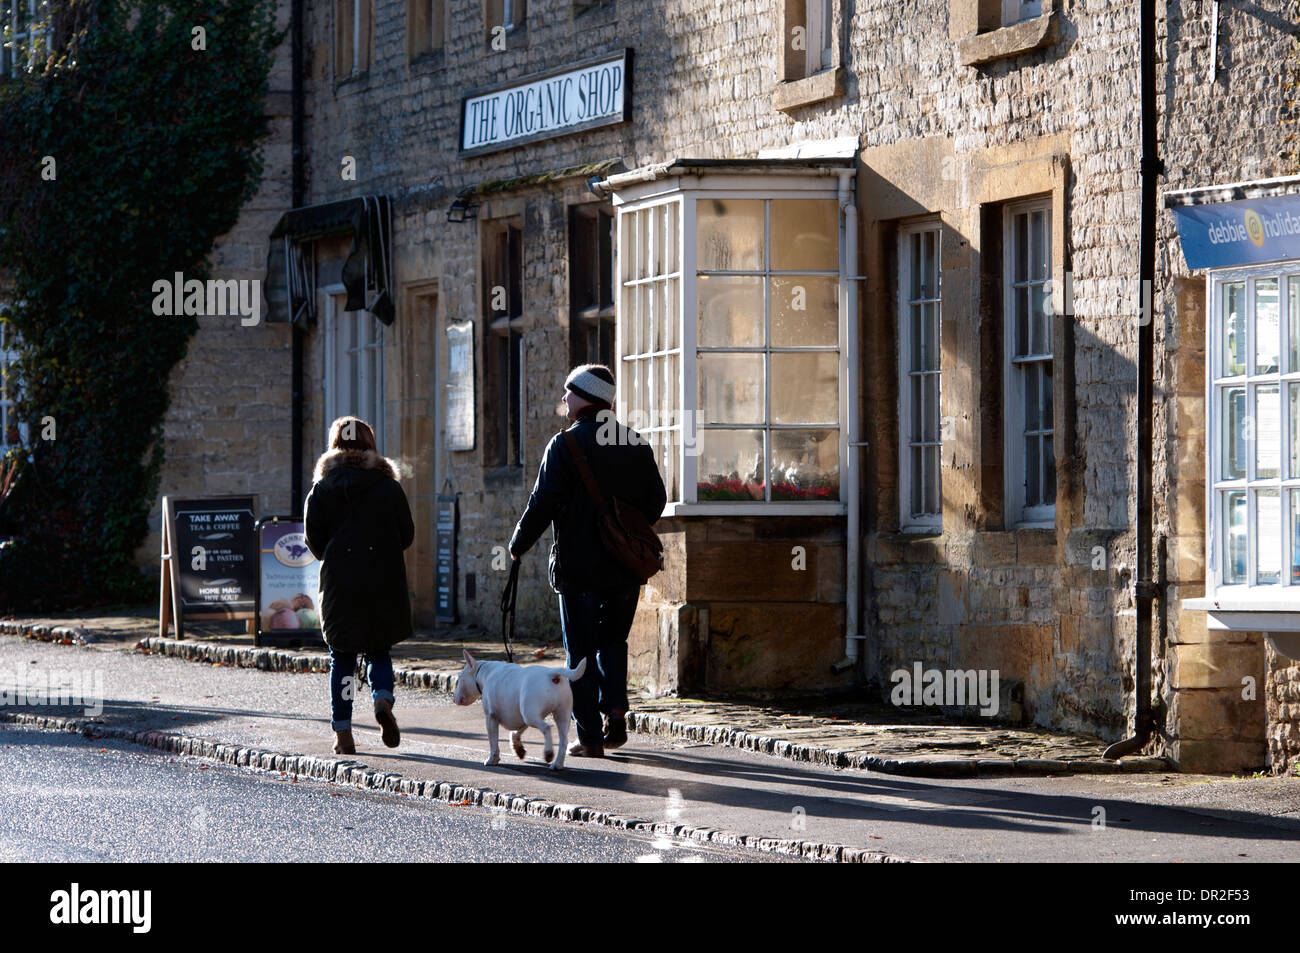 Stow-on-the-Wold, Gloucestershire, Reino Unido Foto de stock